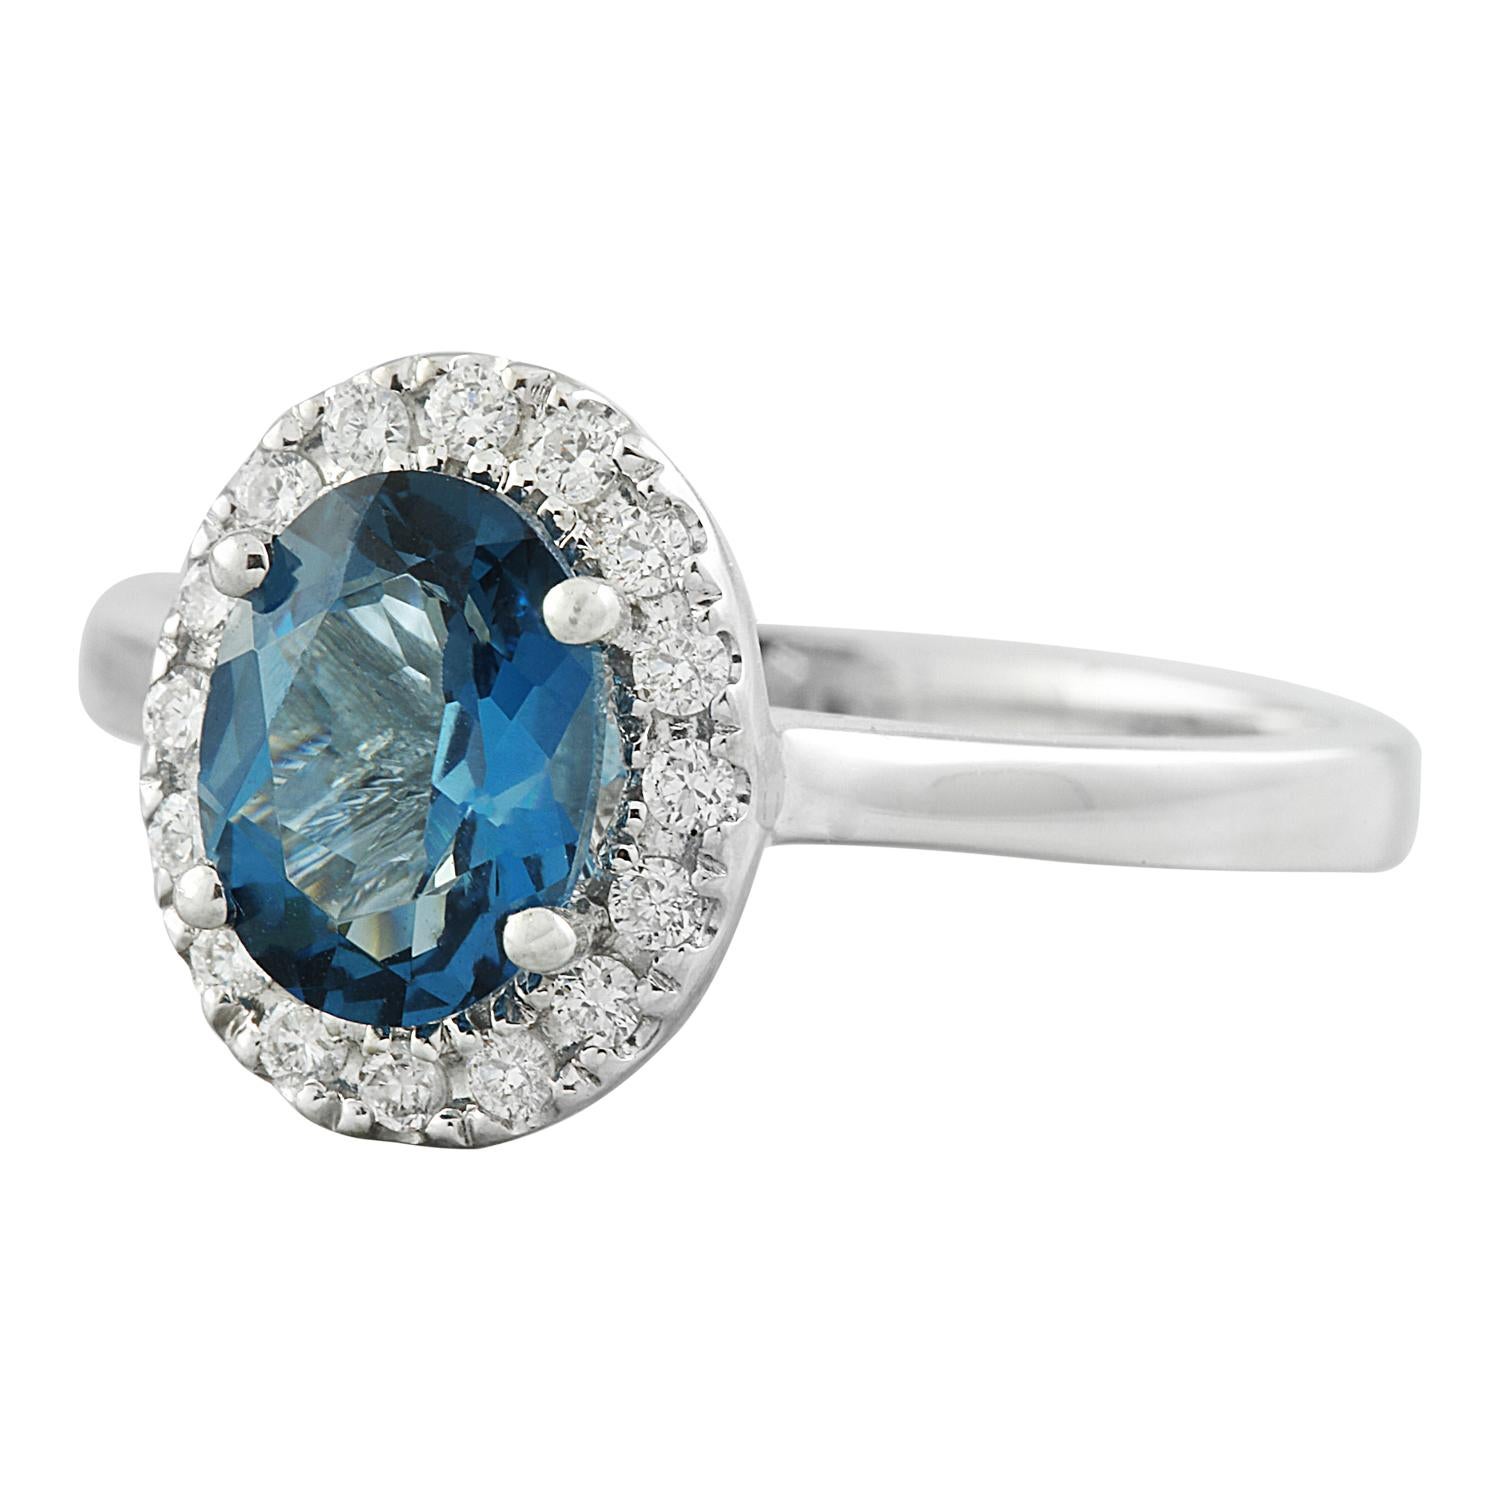 Introducing our elegant 1.60 Carat Natural Topaz Ring, meticulously crafted in exquisite 14K Solid White Gold. Authenticated with a stamped mark of 14K, this graceful ring weighs a total of 3 grams, promising both style and durability. At its center